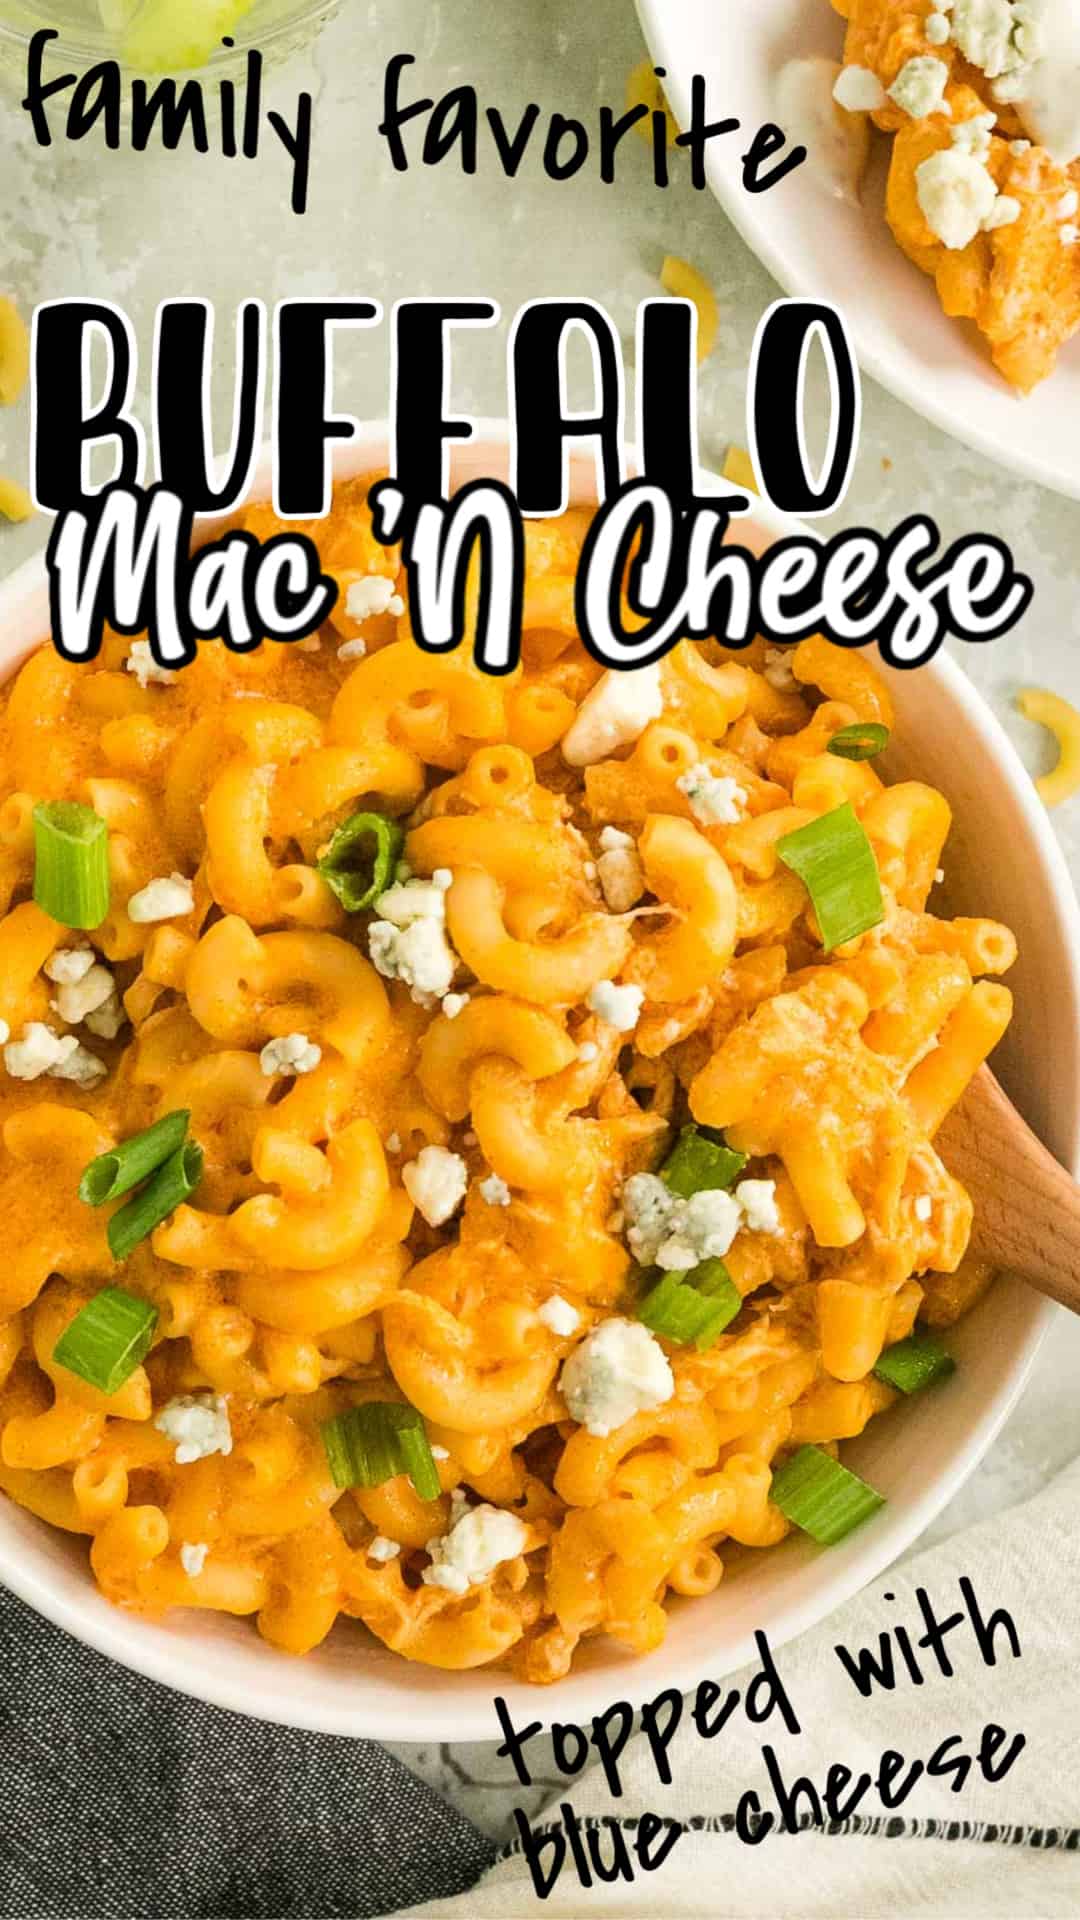 You’ve got to try this homemade Buffalo Chicken Mac and Cheese! It’s creamy, cheesy, mildly spicy, and has a hint of smokiness. Simply delicious! And it’s super easy to make, keeps great in the fridge and freezer, and is perfect when you need to feed a crowd! #cheerfulcook #buffalochicken #macandcheese ♡ cheerfulcook.com via @cheerfulcook